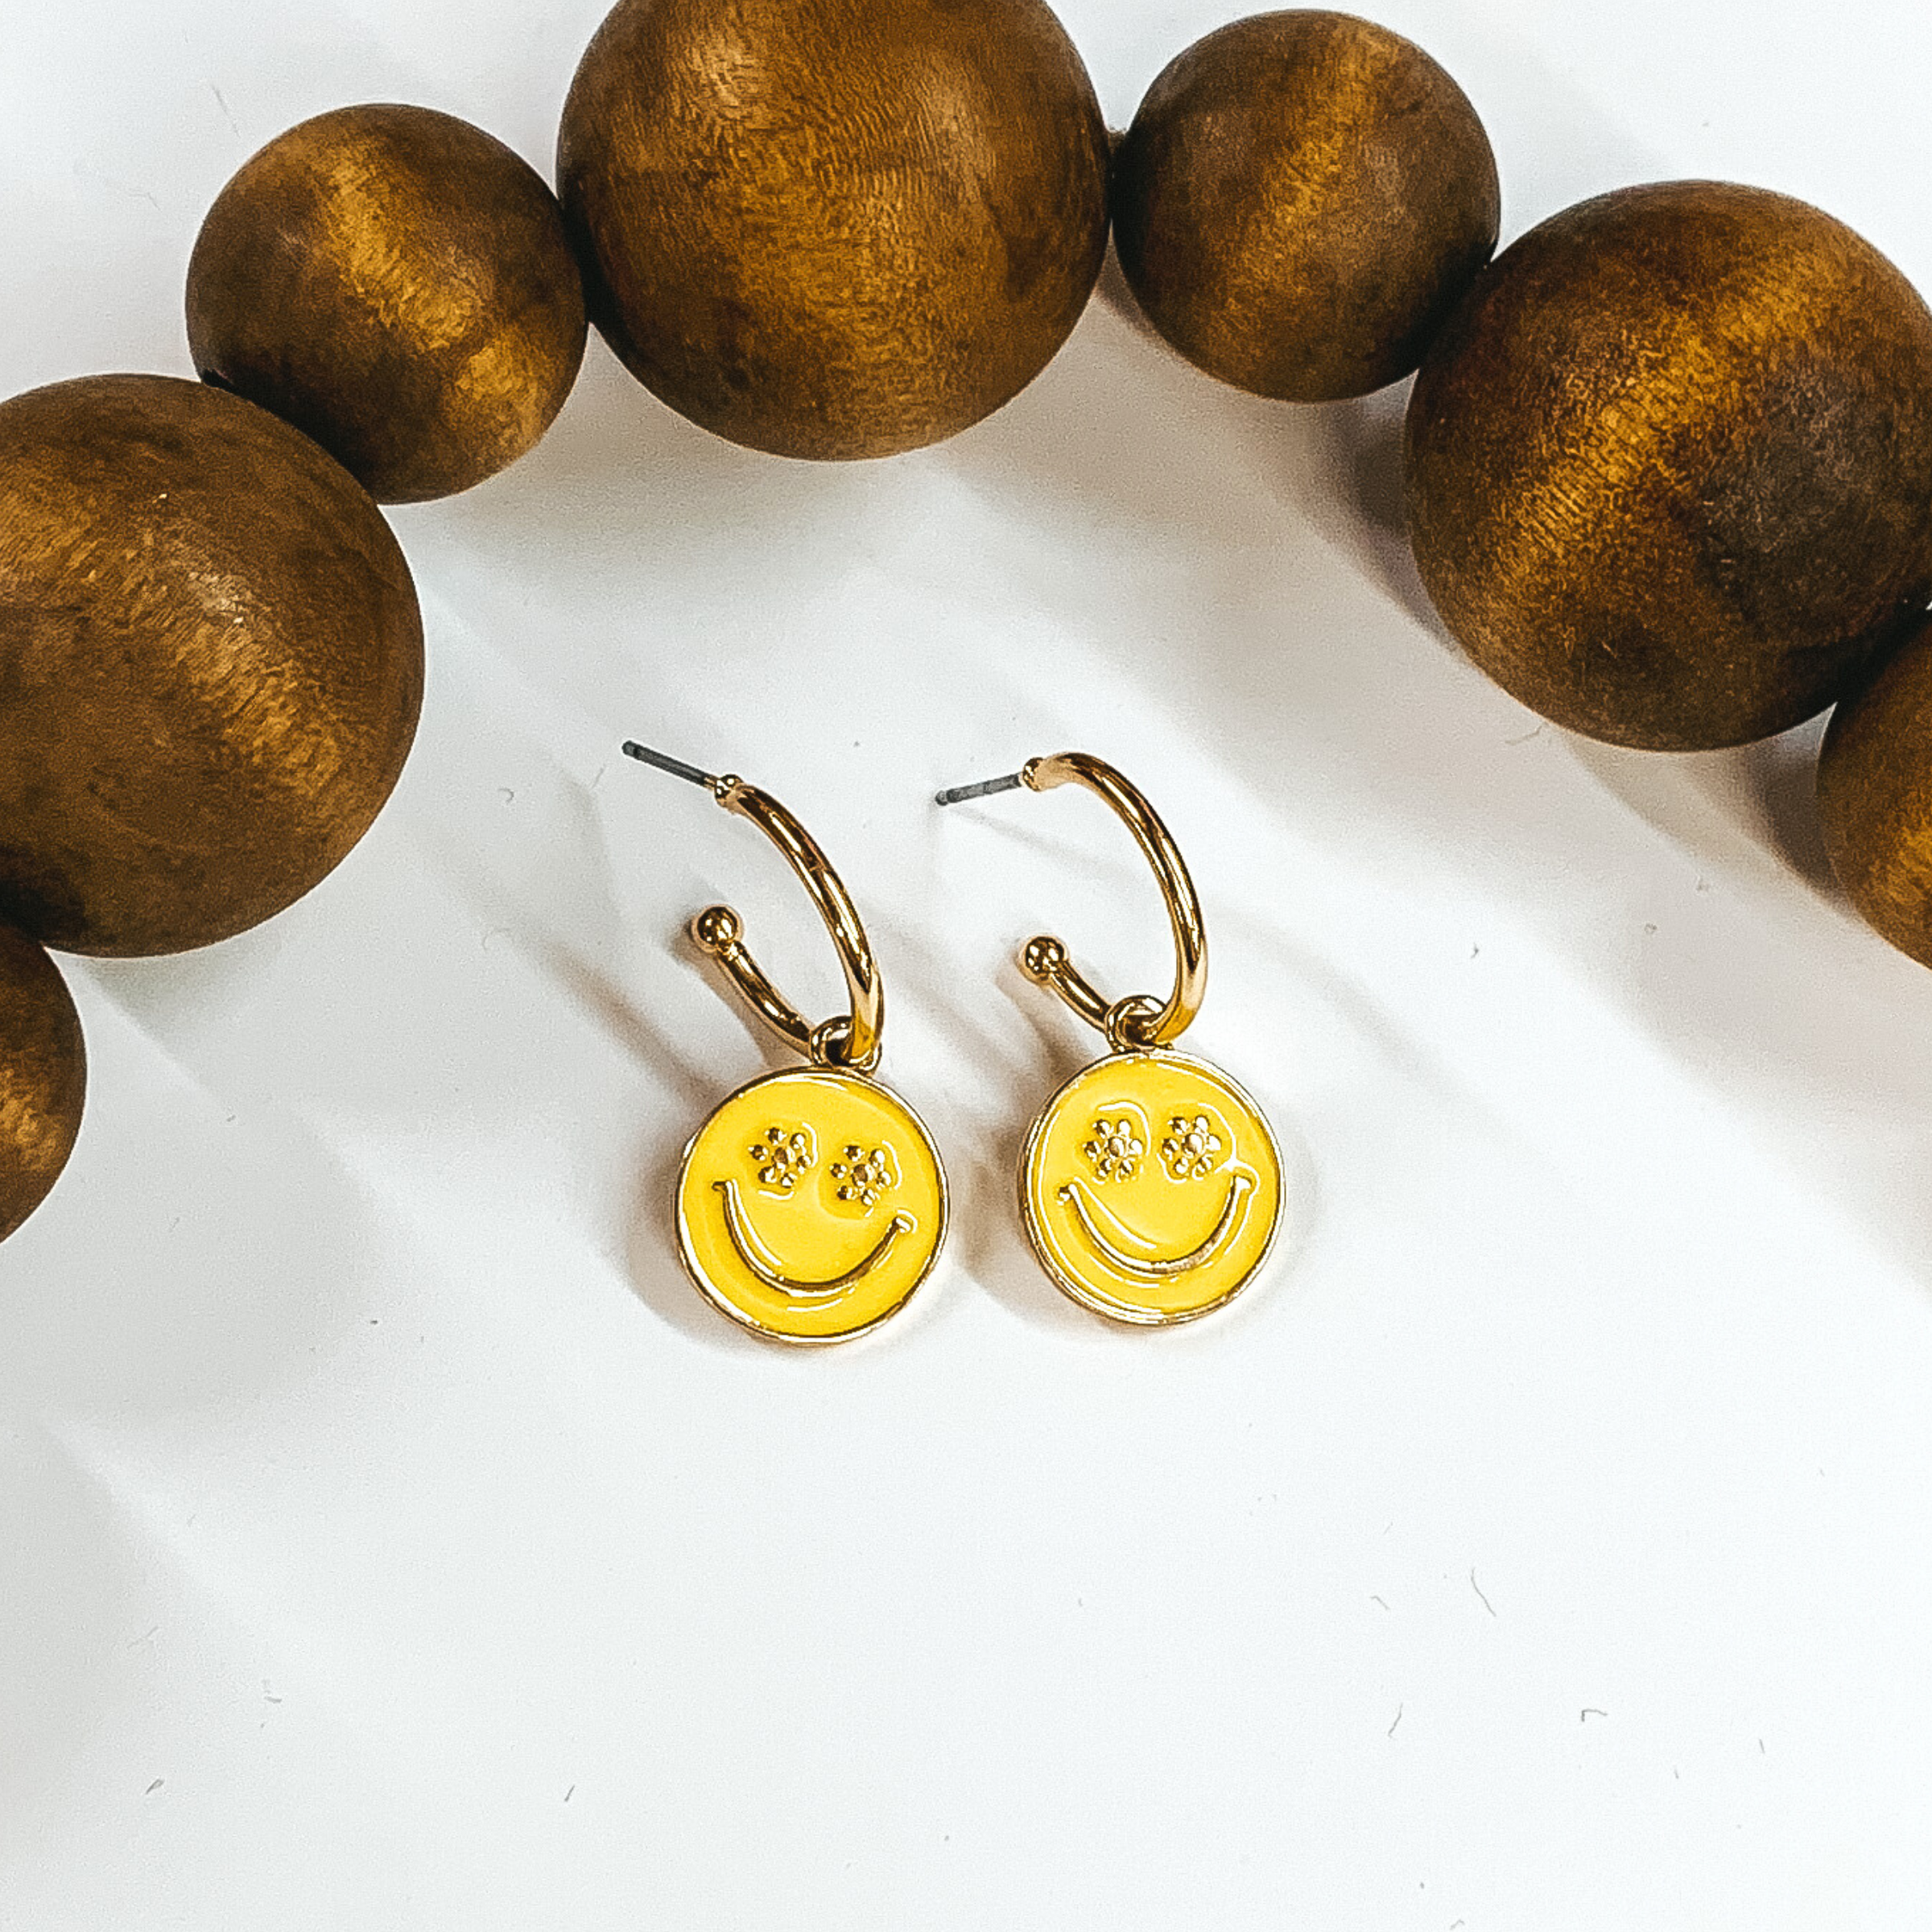 Small, gold hoop earrings with a hanging circle pendant in yellow. The pendant has a gold smiley face with the eyes being small flowers. These earrings are pictured laying on a white background with dark brown beads at the top of the picture. 